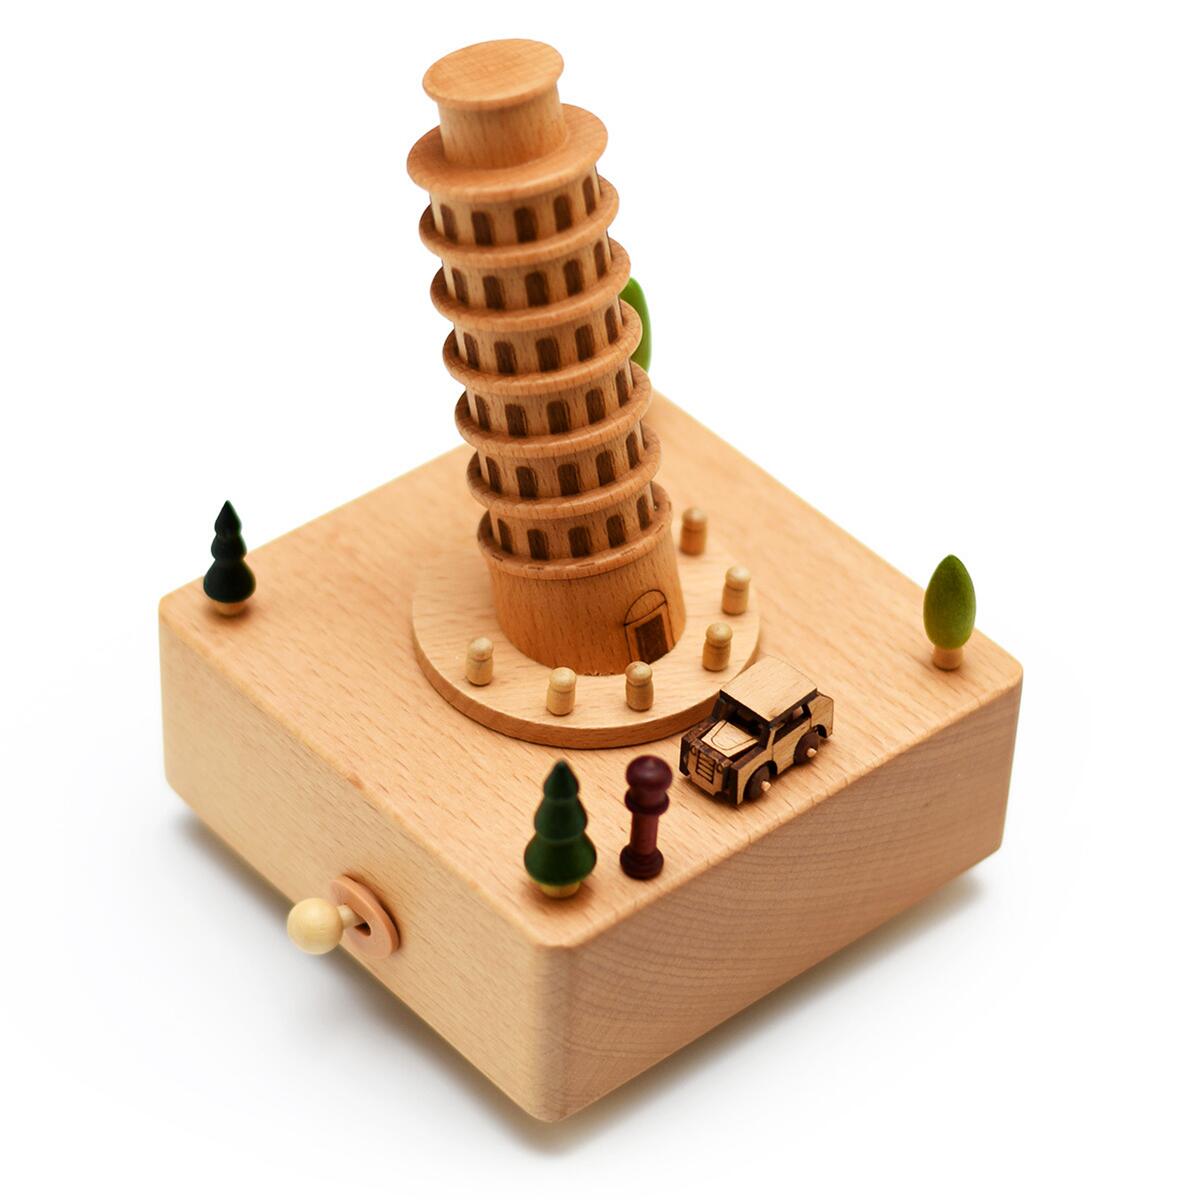 The Leaning Tower of Pisa and cars in motion (Melody:Castle in the Sky)